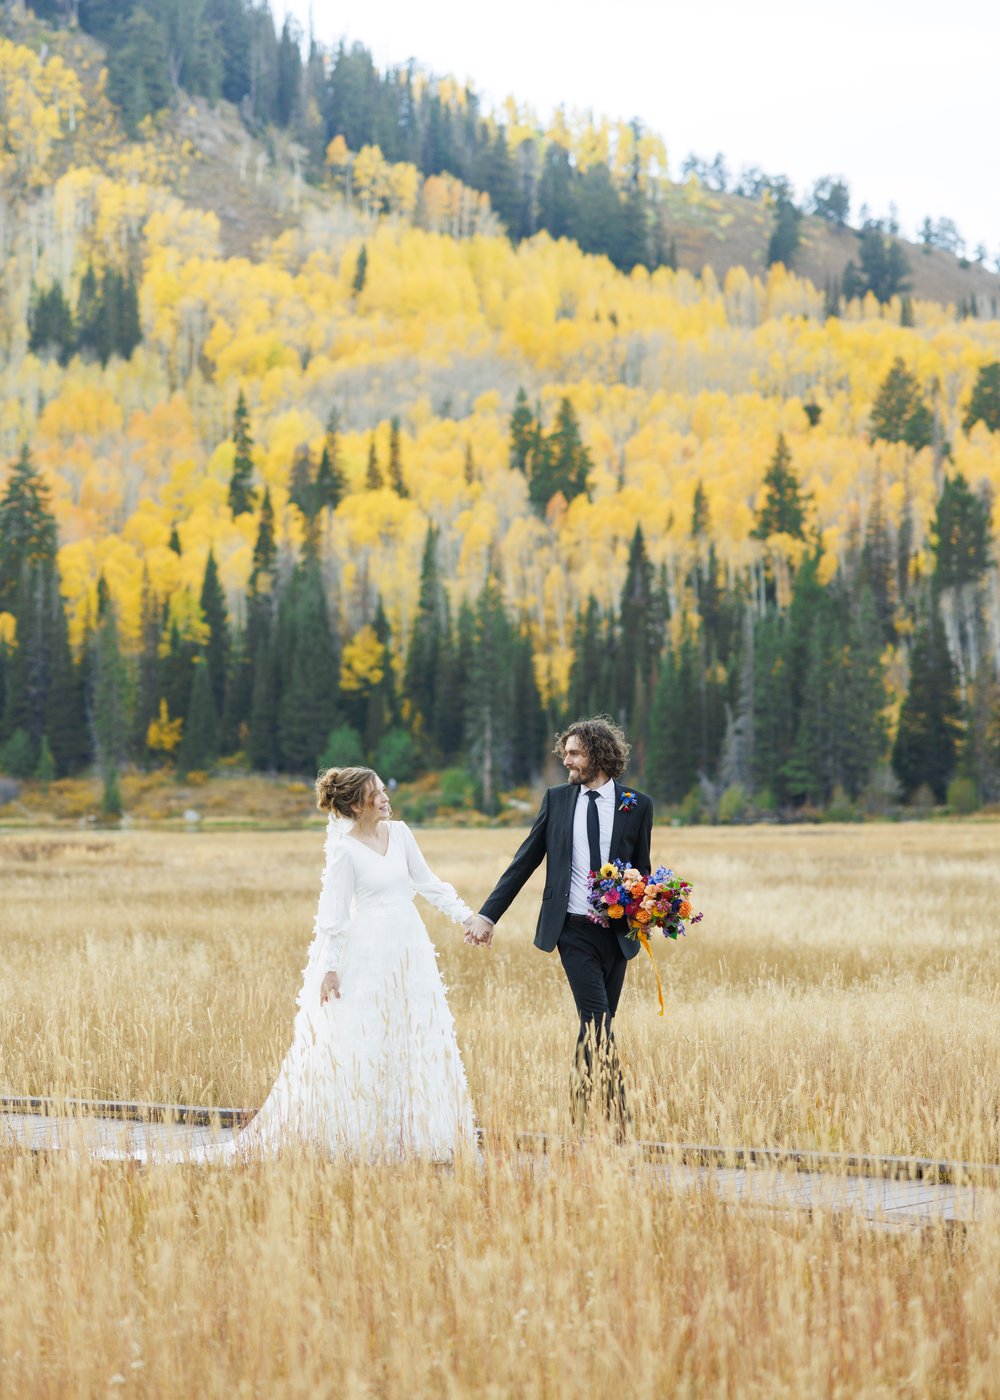  The groom and bride hold hands on a dirt path with fall leaves behind them captured by Savanna Richardson Photography. wed photo locations #SavannaRichardsonPhotography #SavannaRichardsonFormals #CottonwoodCanyon #WeddingFormals #SLCWedding #fallwed